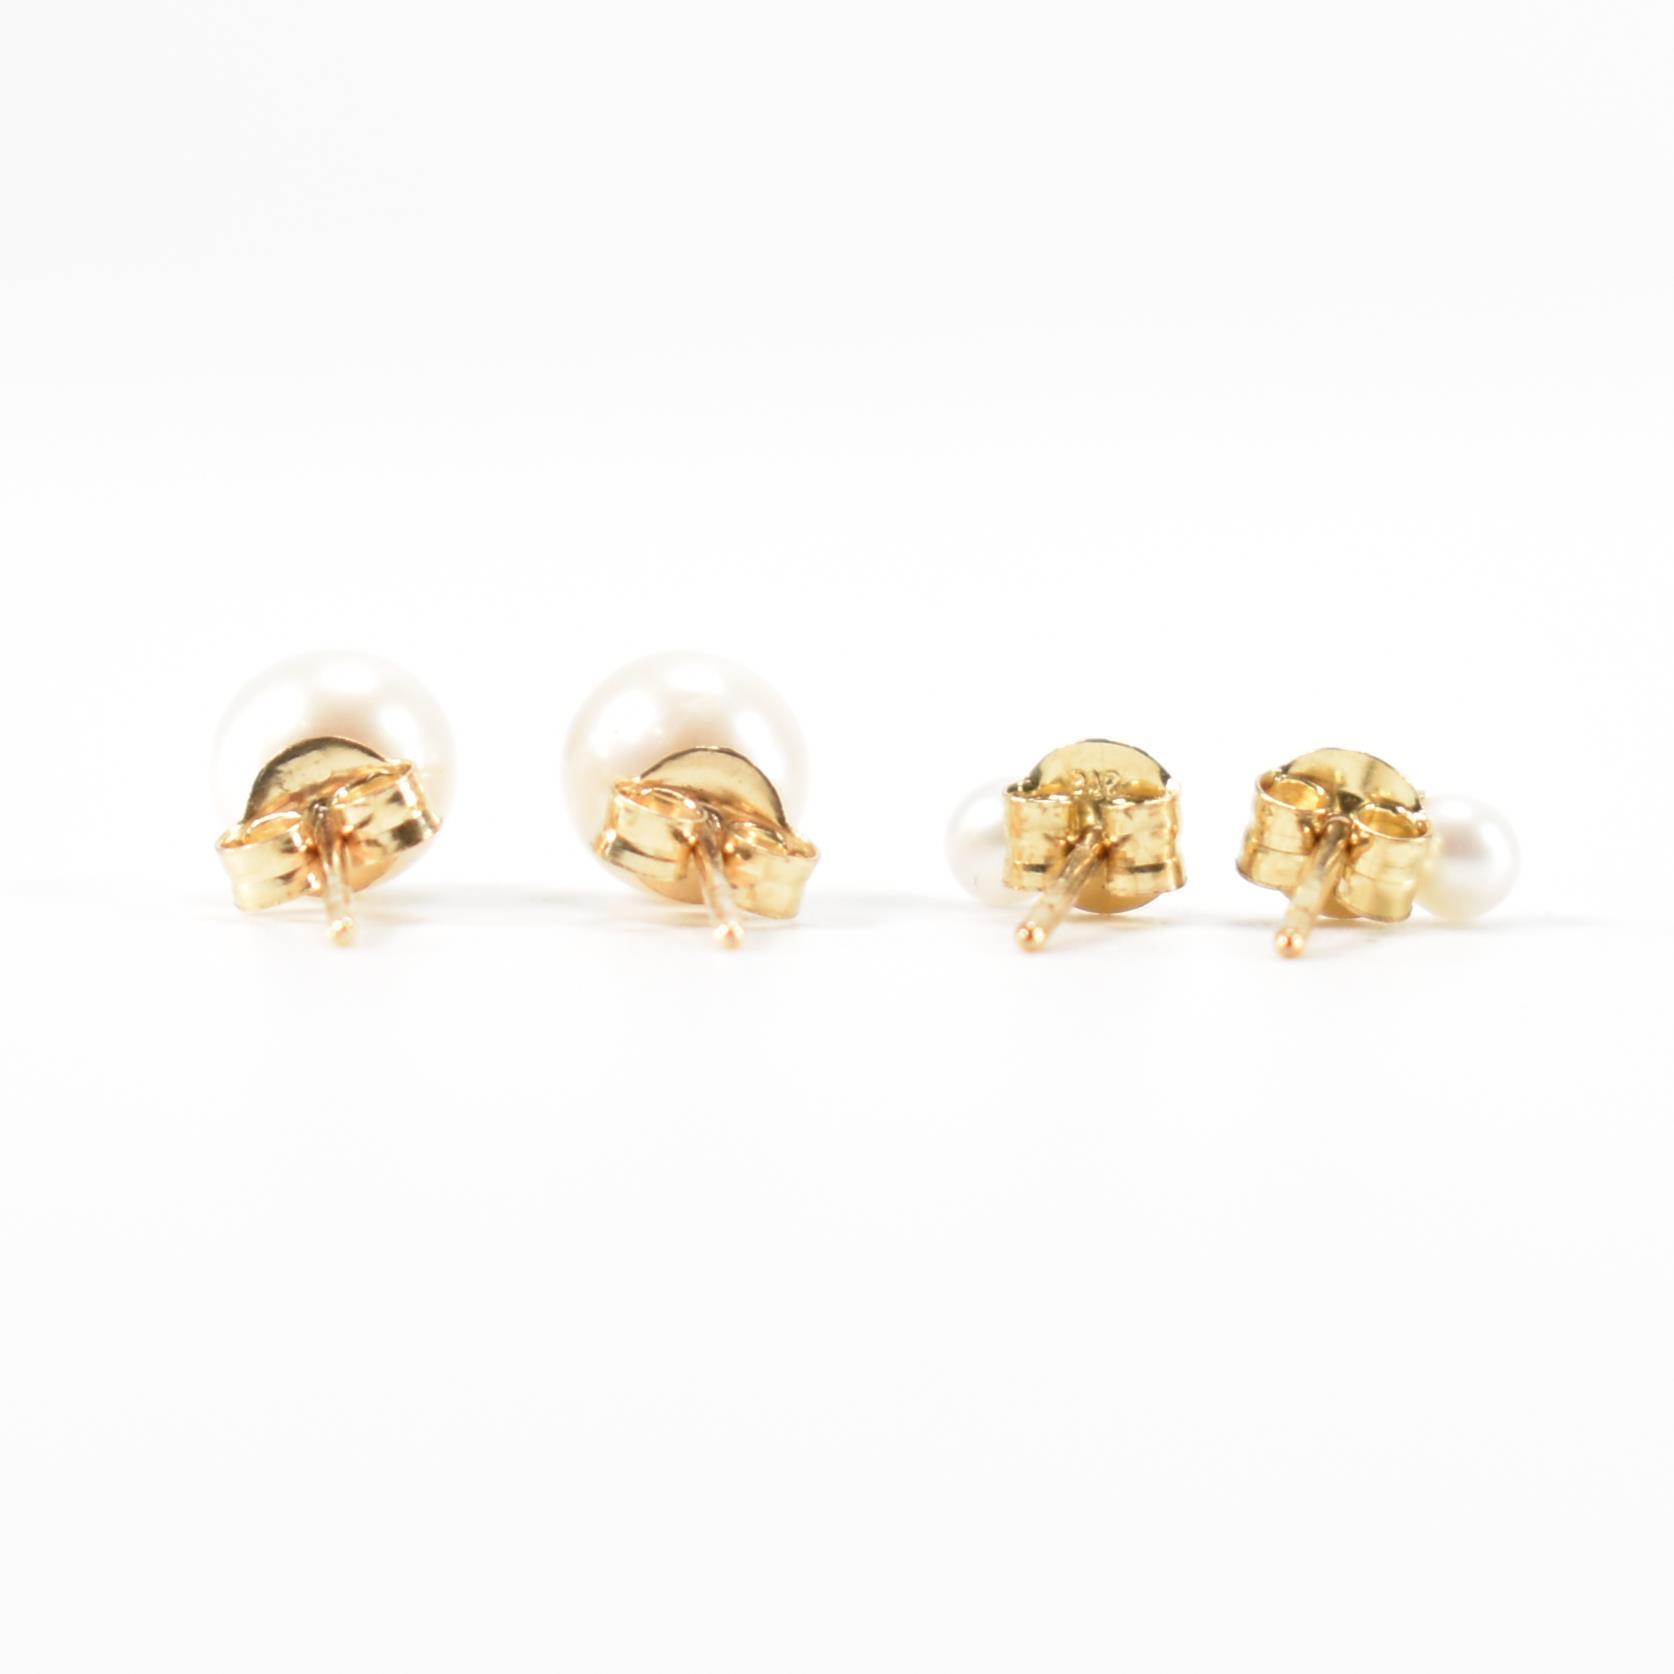 THREE PAIRS 9CT GOLD EARRINGS - Image 2 of 2